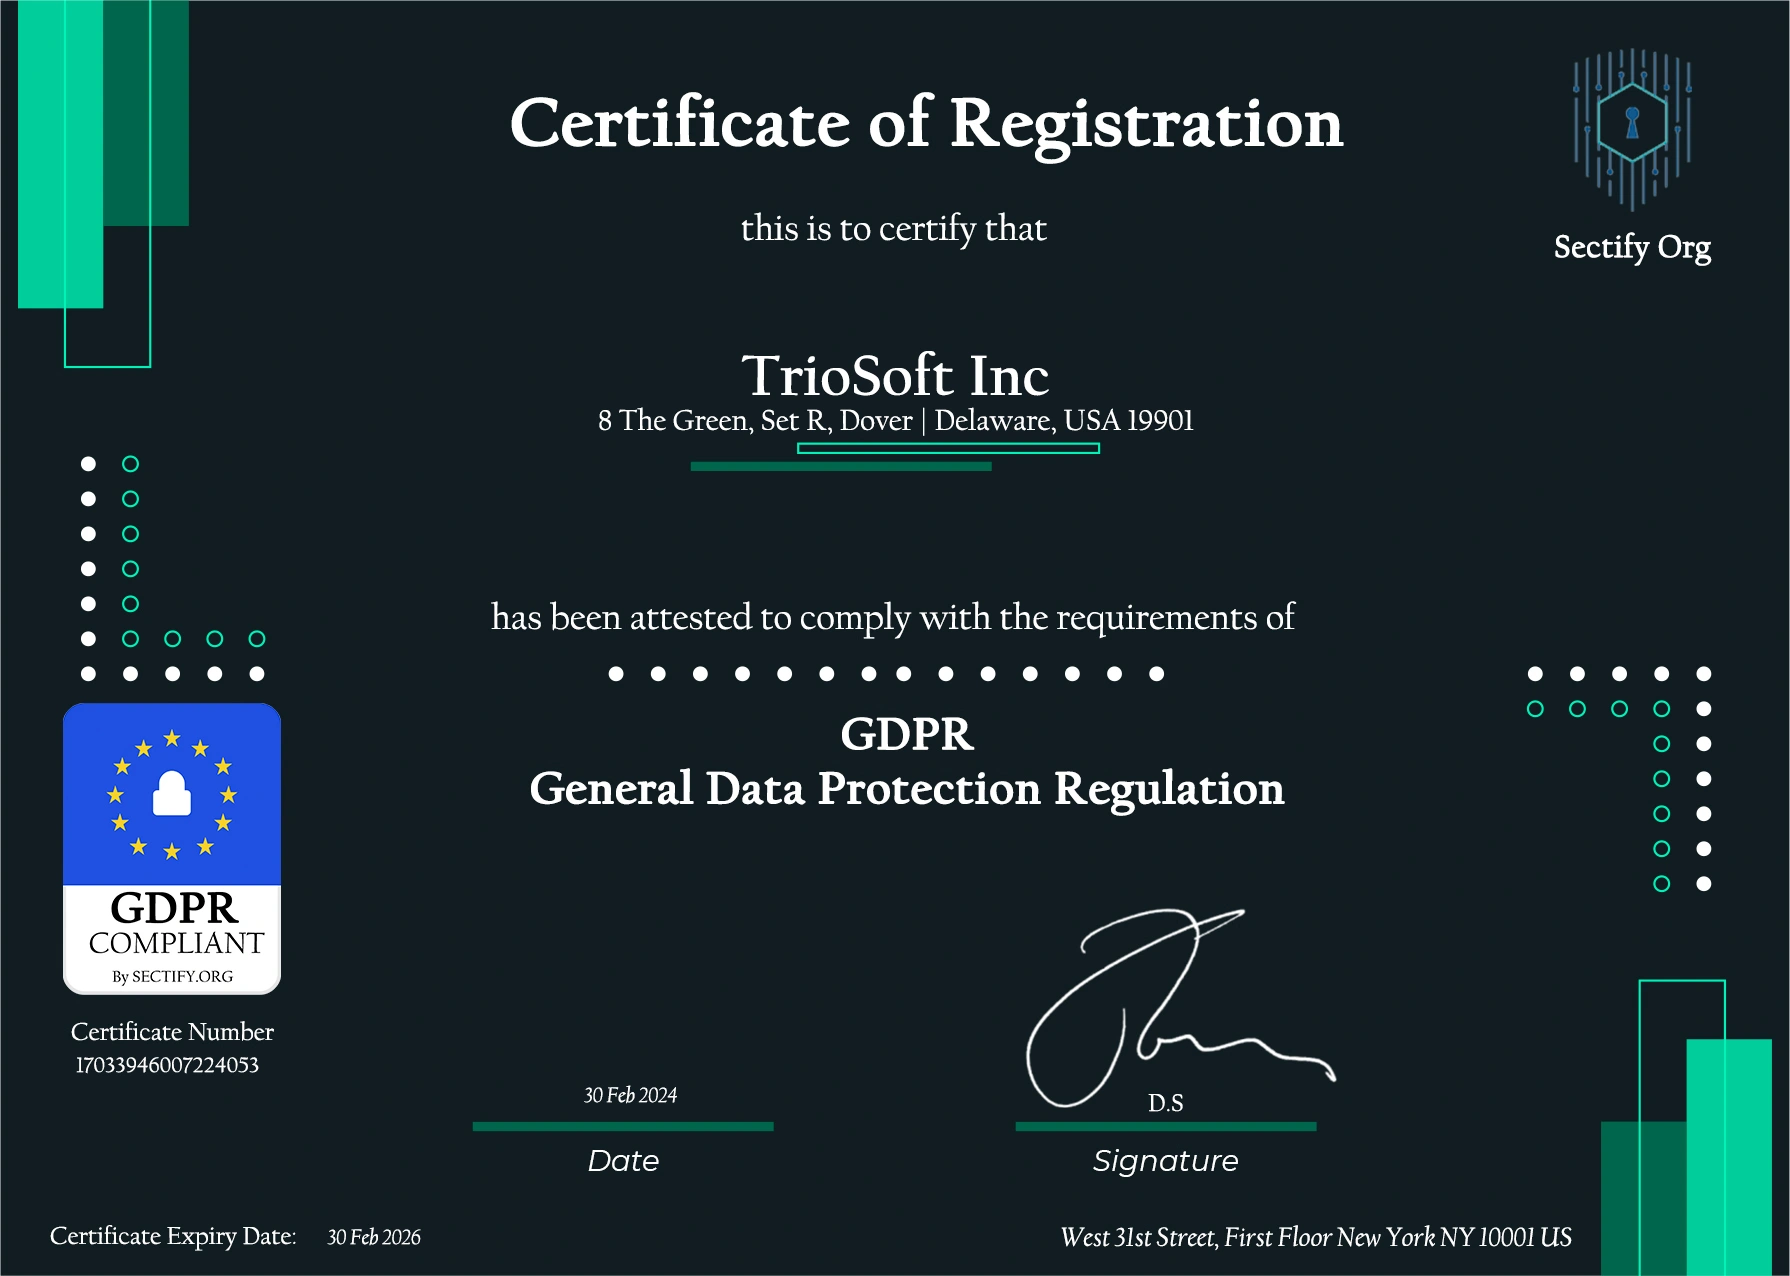 certificate of GDPR issued for TrioSoft Inc. 2024